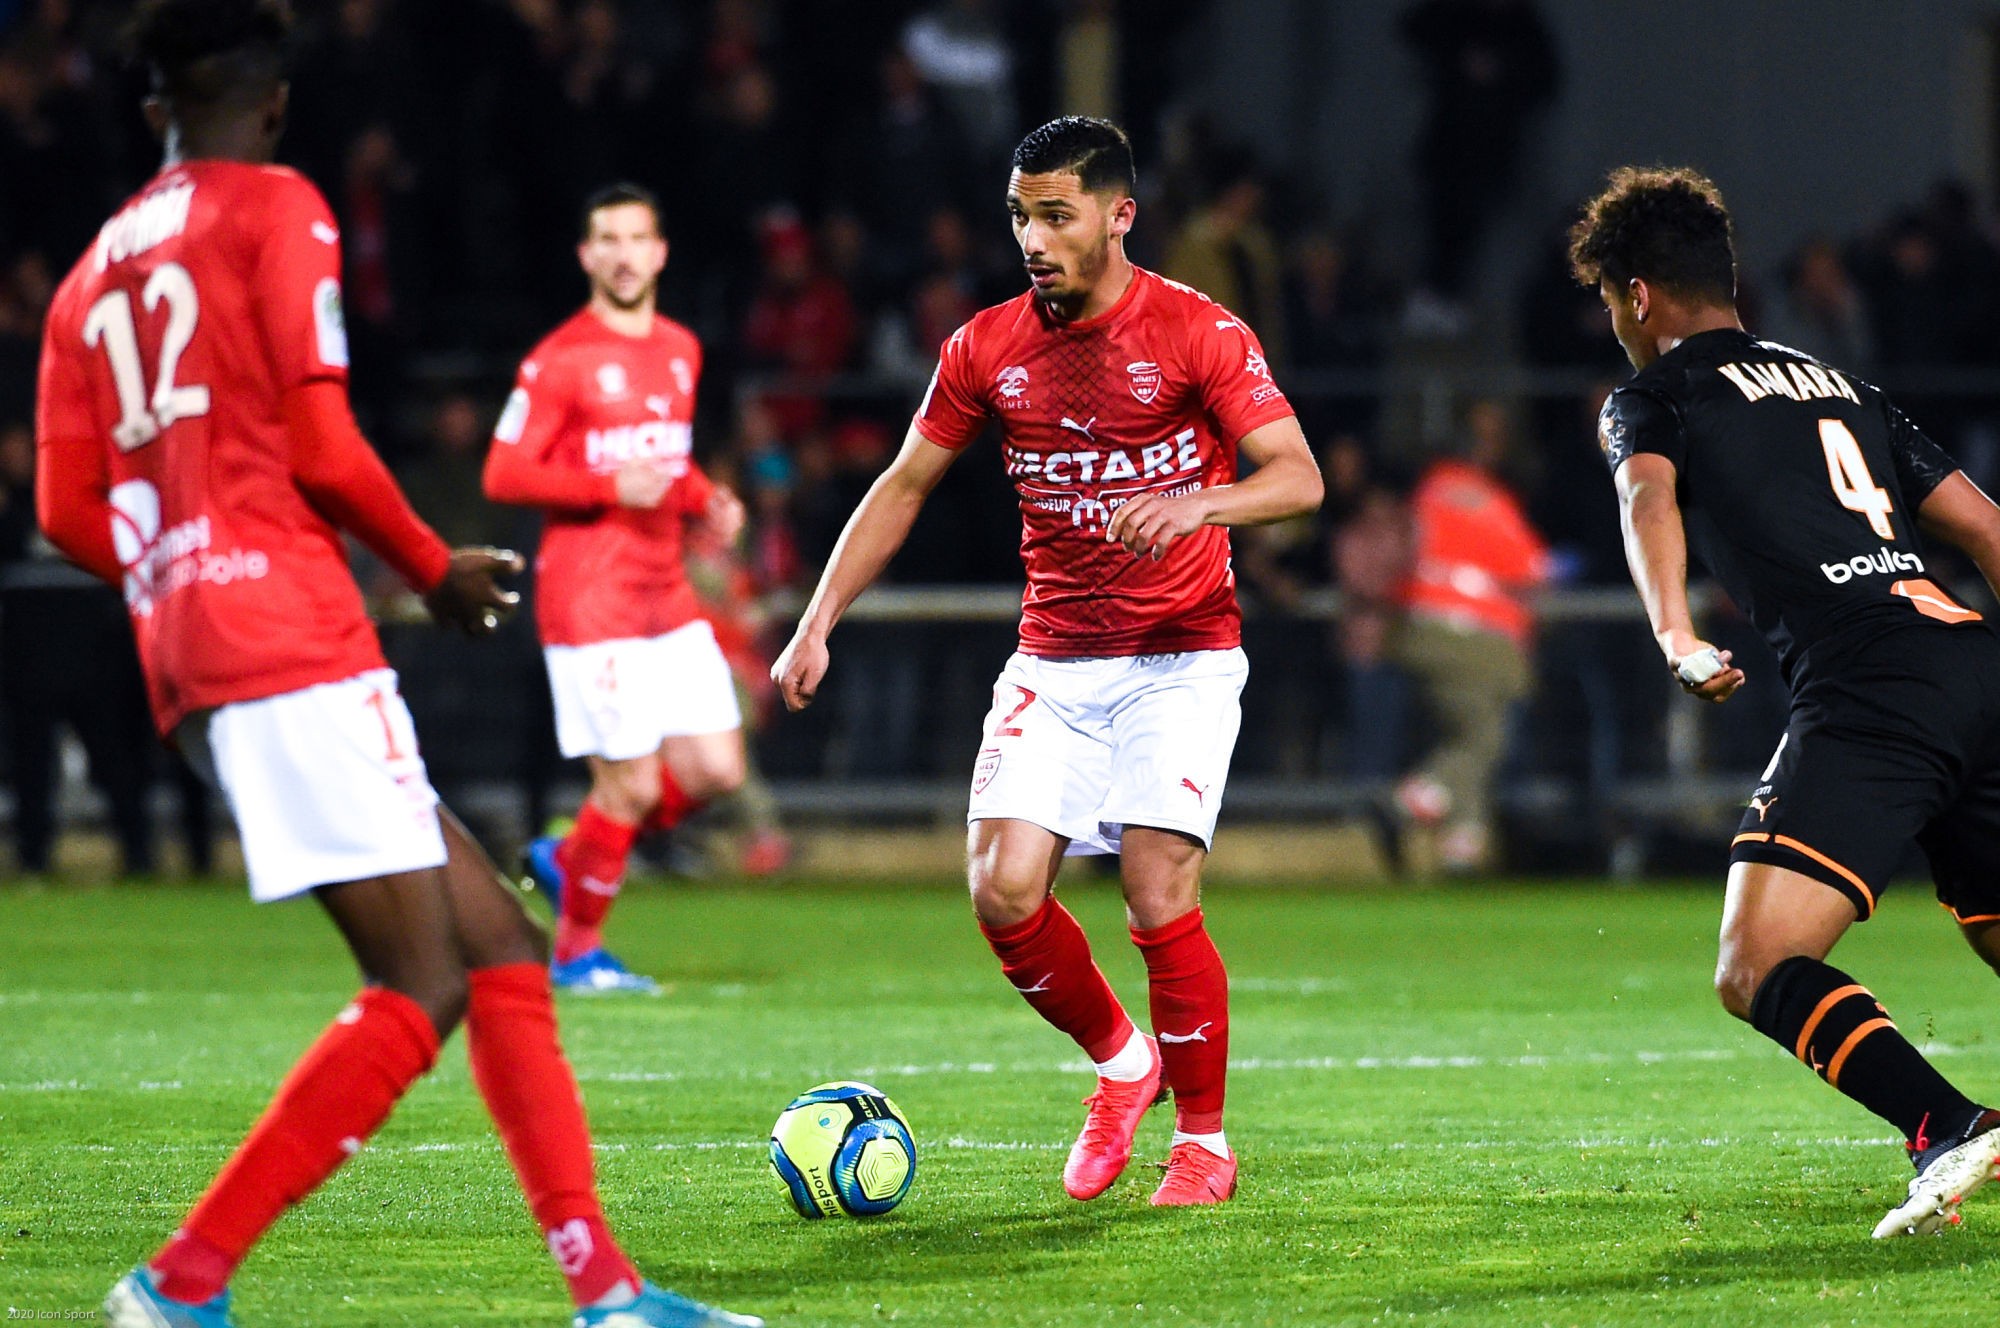 Yassine BENRAHOU of Nimes  during the Ligue 1 match between Nimes Olympique and Olympique Marseille at Stade des Costieres on February 28, 2020 in Nimes, France. (Photo by Alexandre Dimou/Icon Sport) - Yassine BENRAHOU - Stade des Costières - Nimes (France)